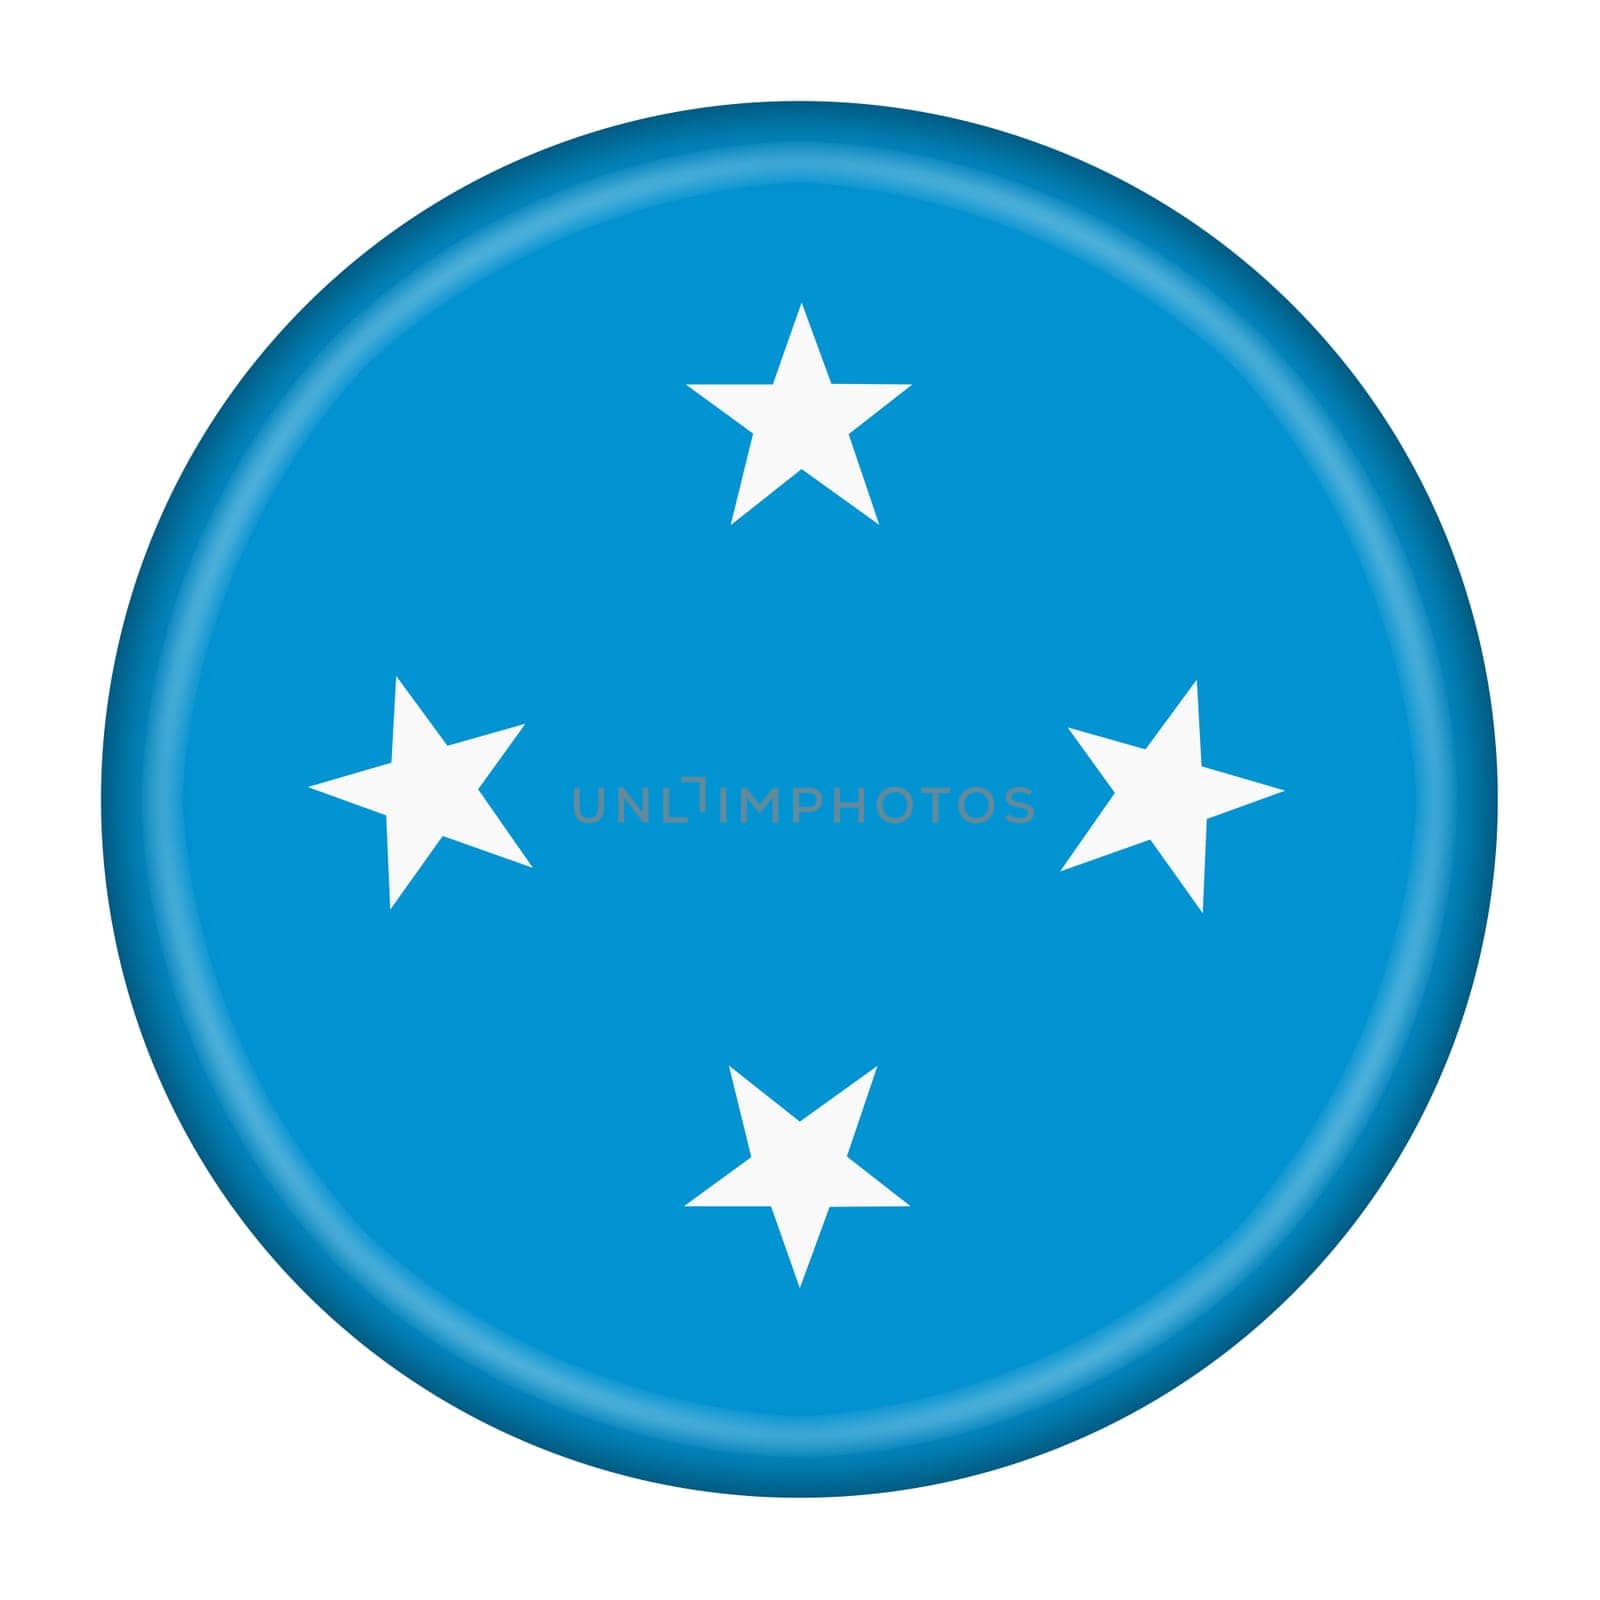 Micronesia flag button 3d illustration with clipping path by VivacityImages